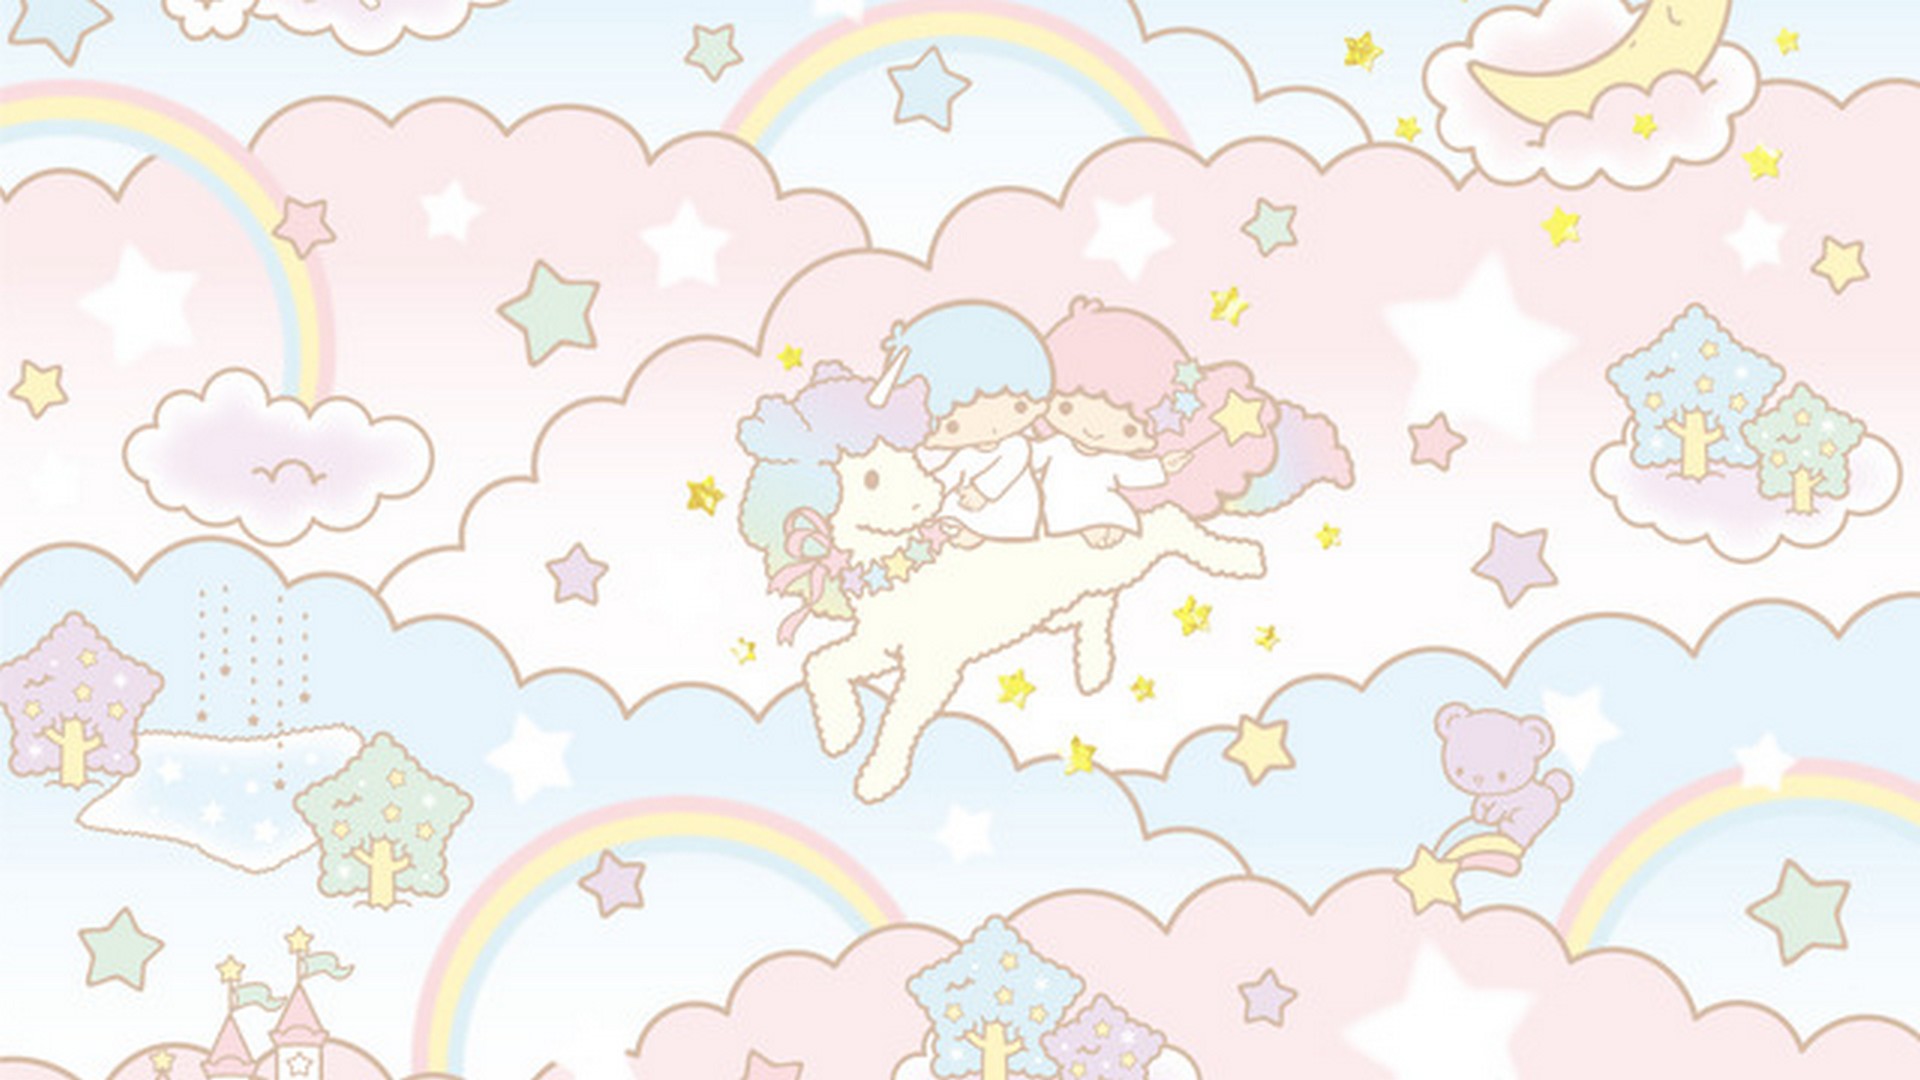 Cute Girly Unicorn Desktop Wallpaper with high-resolution 1920x1080 pixel. You can use this wallpaper for your Windows and Mac OS computers as well as your Android and iPhone smartphones